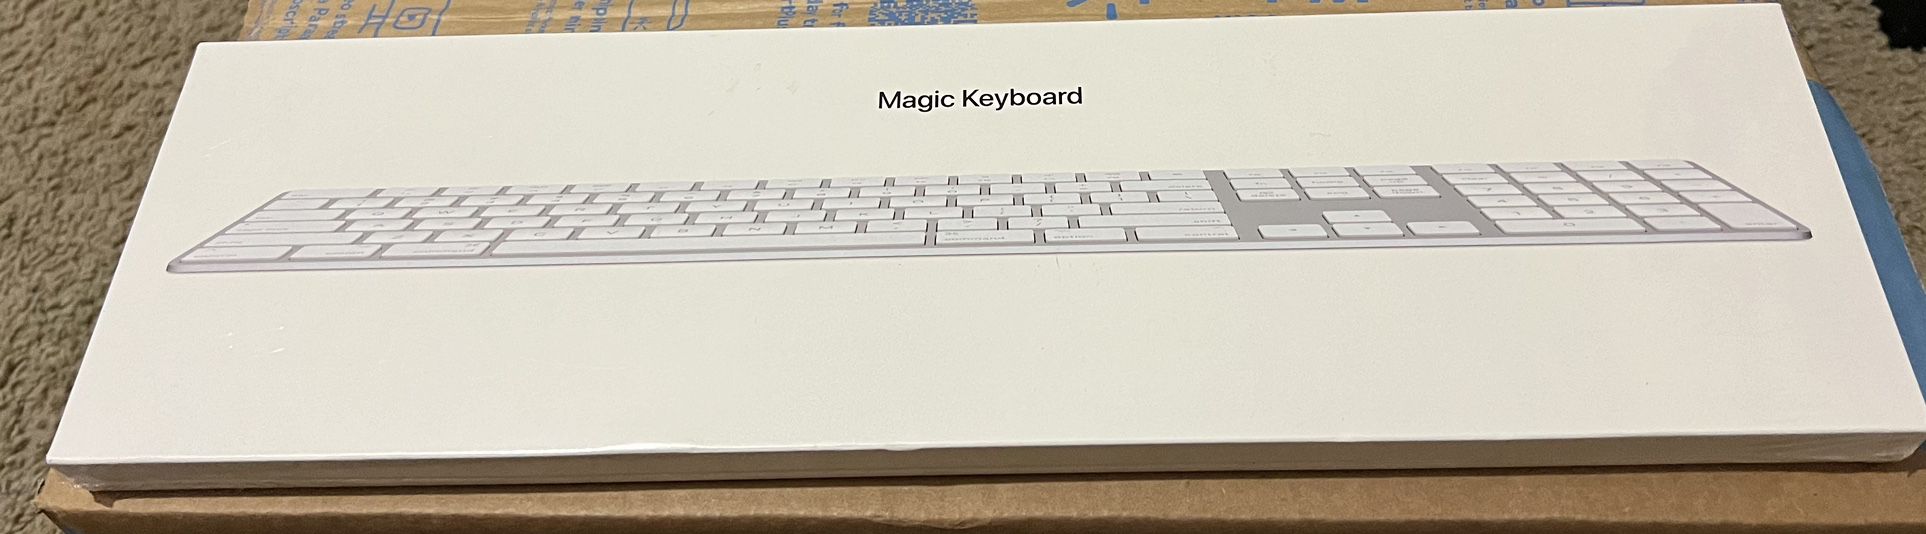 Apple Magic Keyboard with Numeric Keypad in unopened box. 